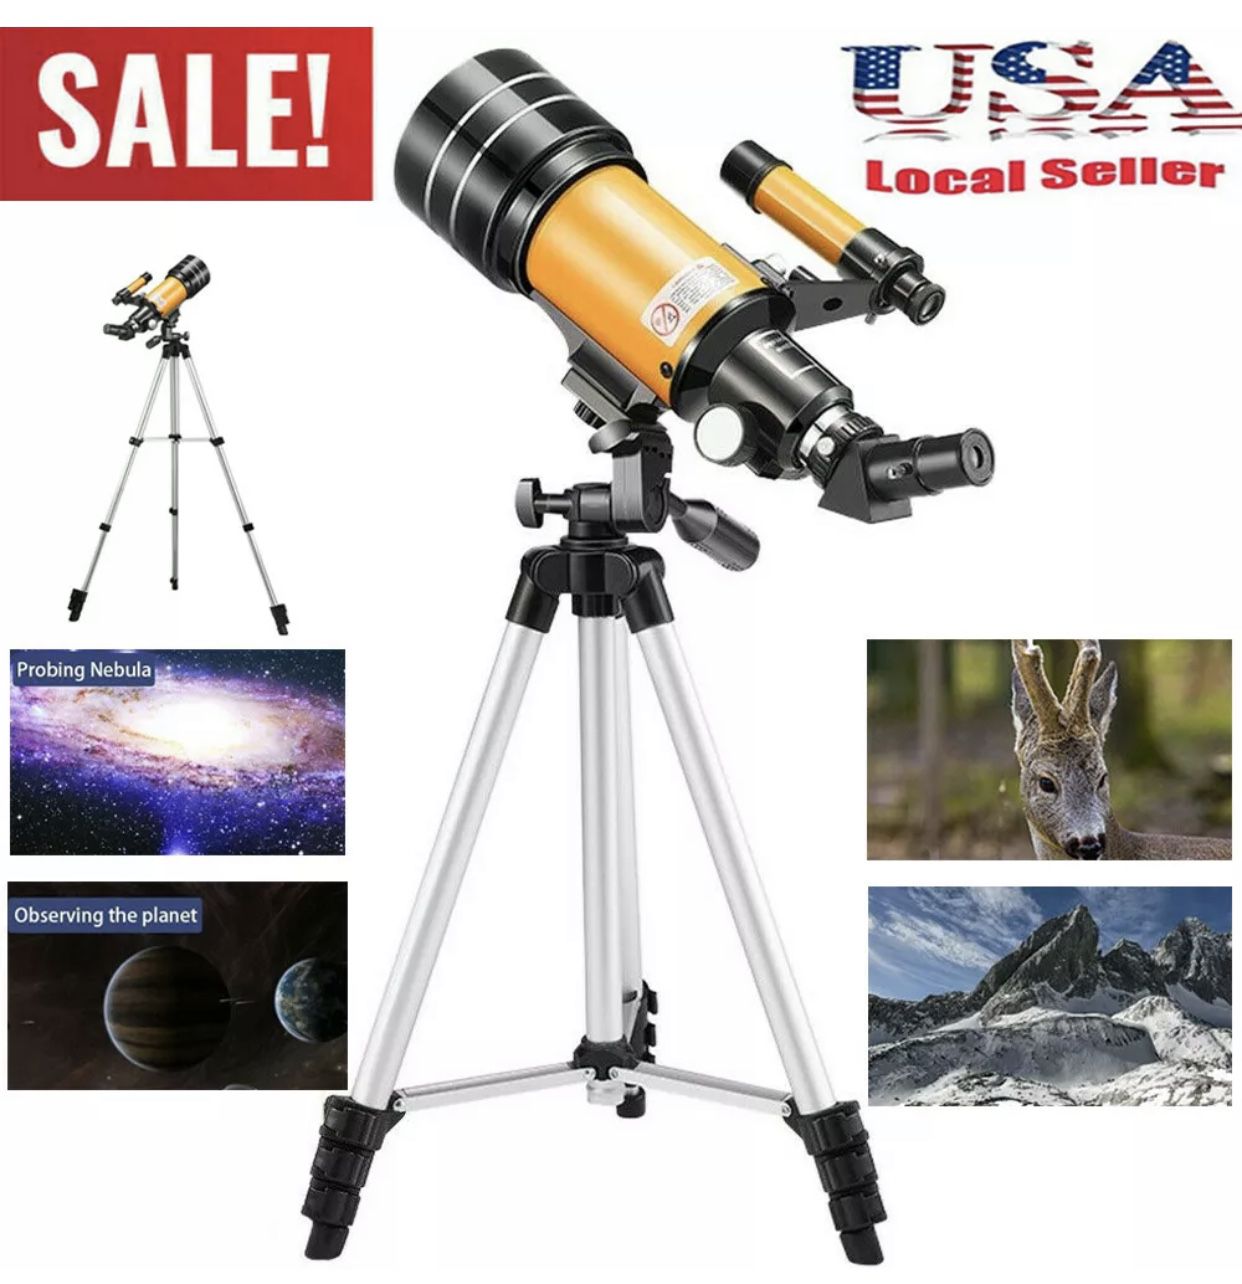 300x70mm Refractor Astronomical Telescope Eyepieces Tripod Travel Wild HD View